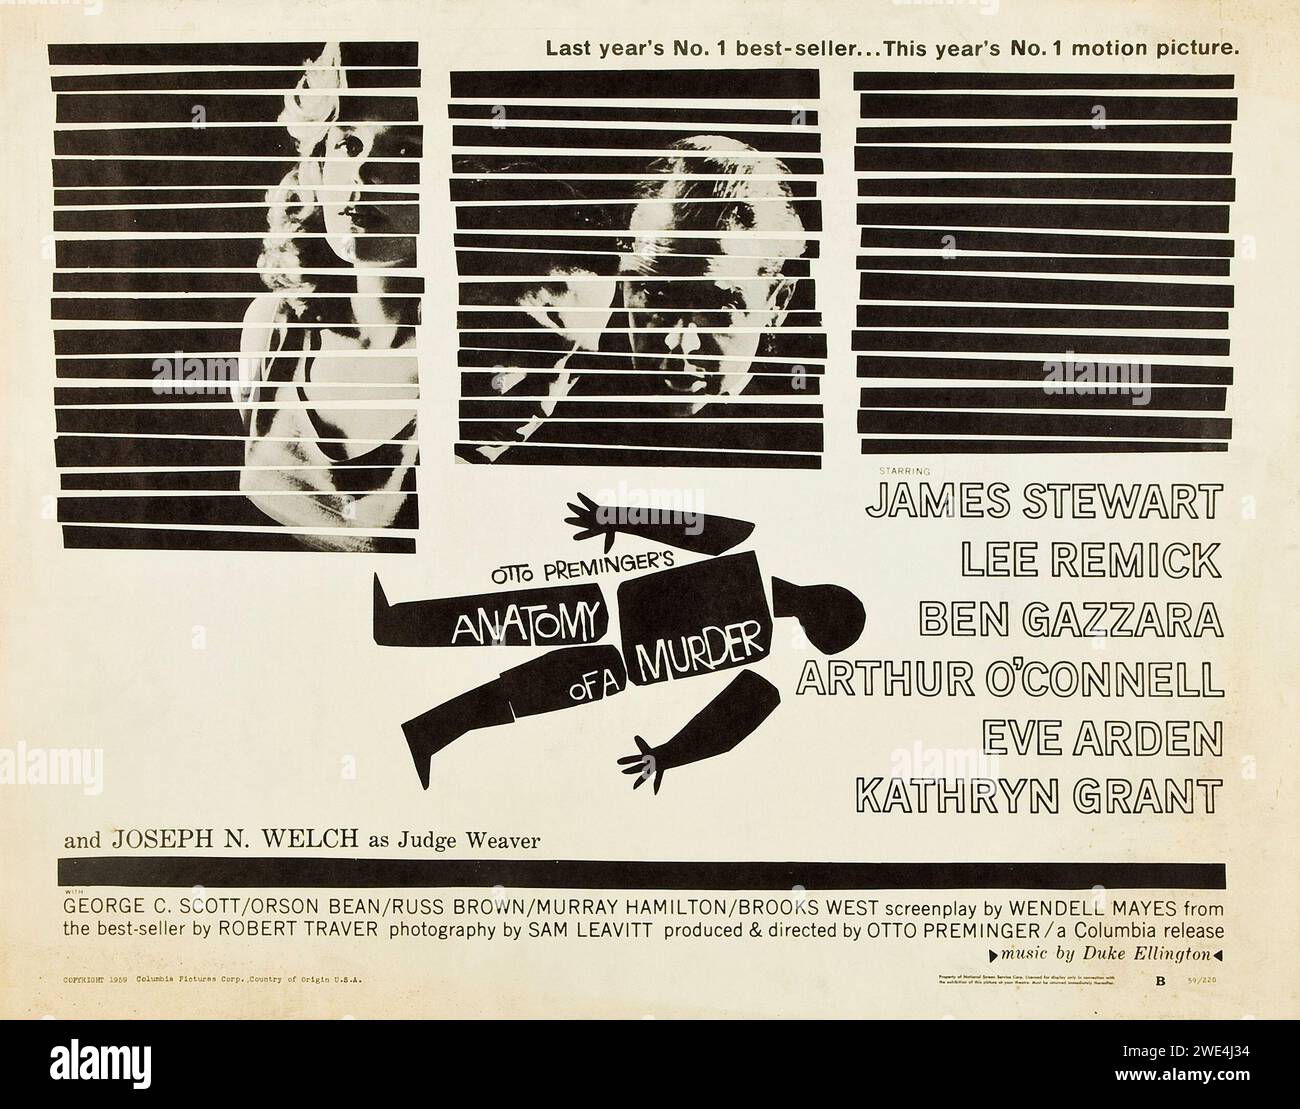 Anatomy of a Murder (Columbia, 1959) vintage film poster - Alfred Hitchcock - James Stewart, Lee Remick - style B Stock Photo